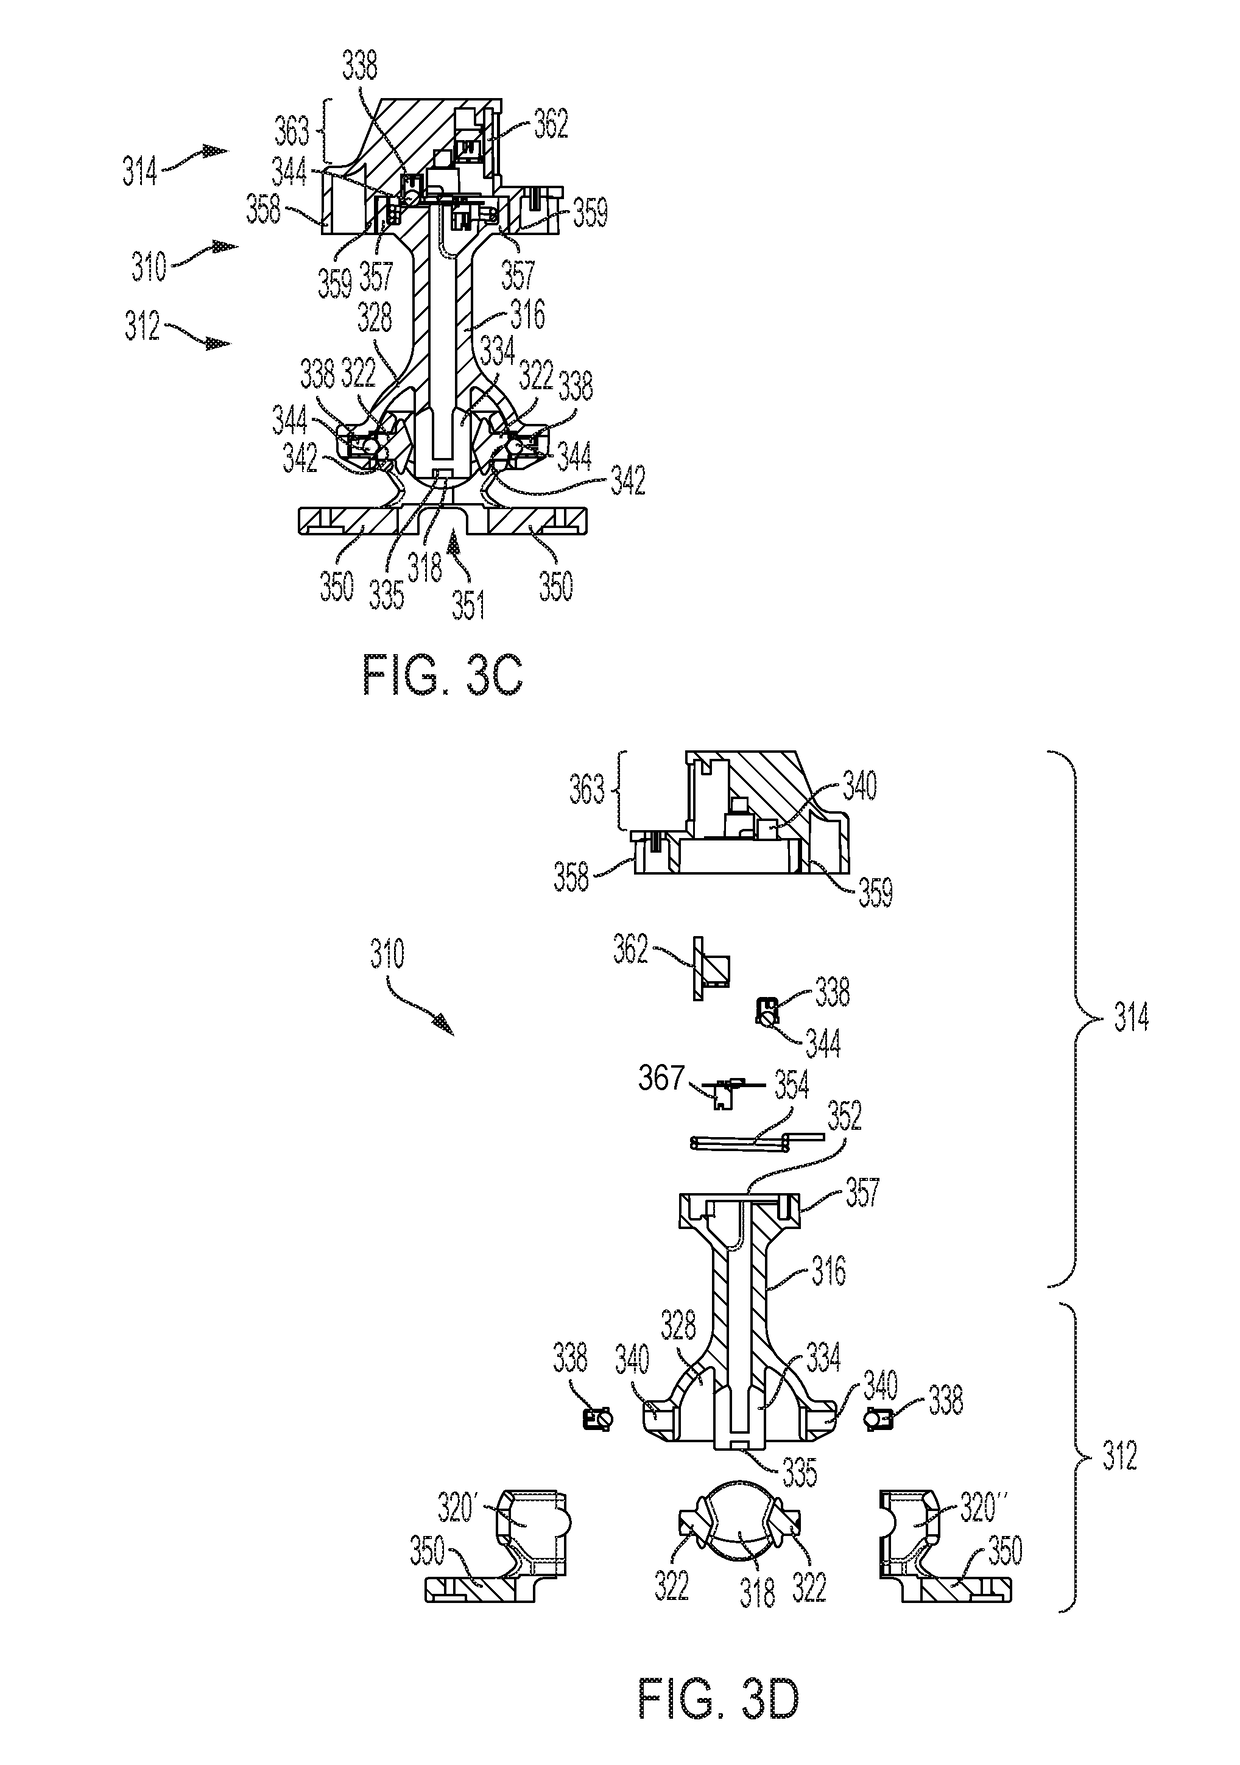 Multi-Axis Gimbal Mounting for Controller Providing Tactile Feedback for the Null Command